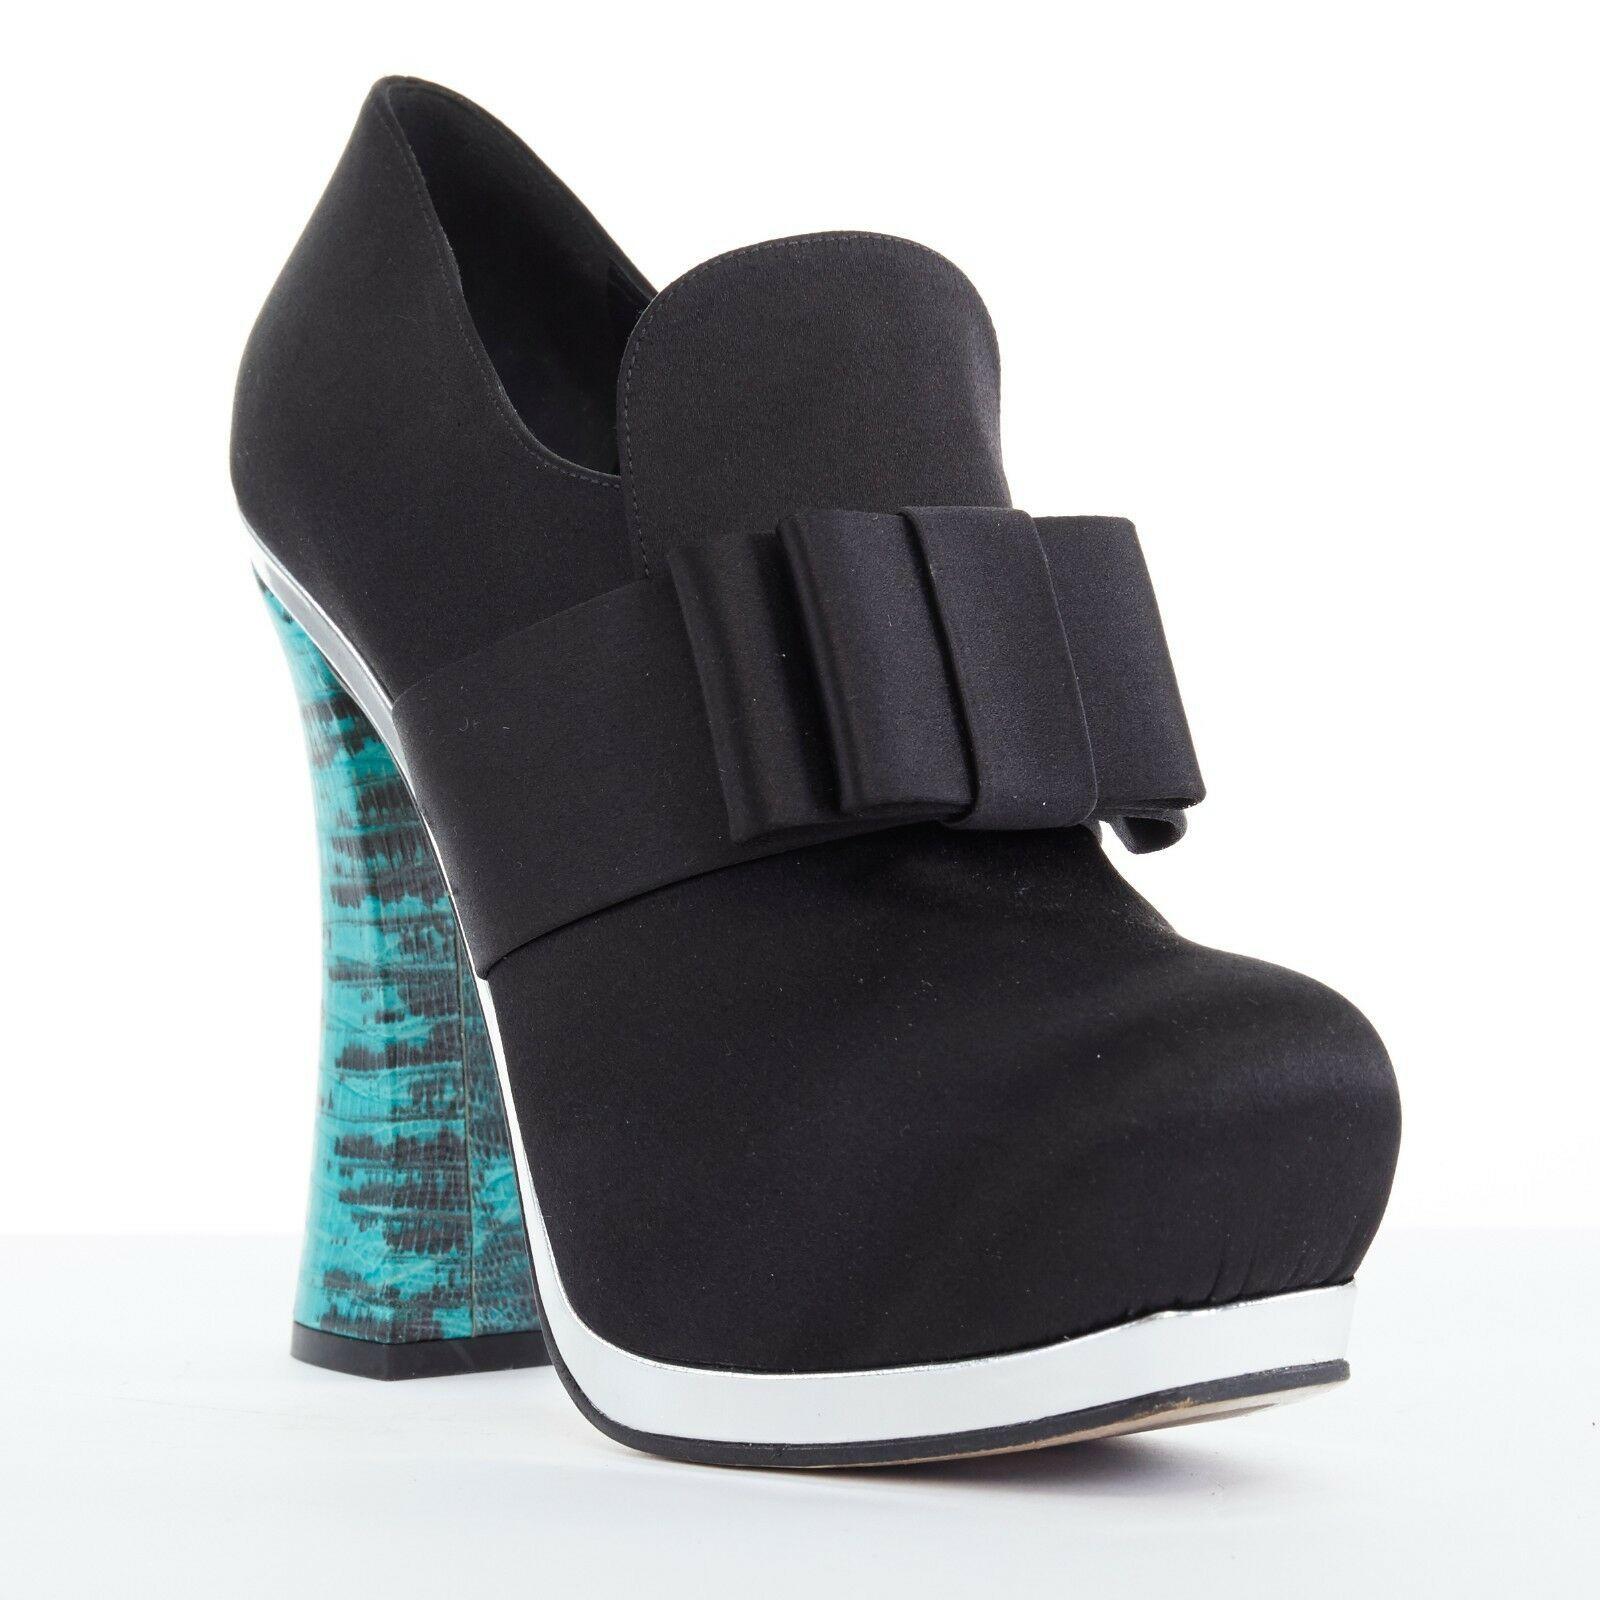 runway MIU MIU black satin bow silver platform blue curved heel bootie heel EU37
MIU MIU
Black satin upper. Signature Miu Miu origami bow design front. 
Rounded toe. Concealed platform. Silver leather trimming along outsole. 
Turquoise blue stamped